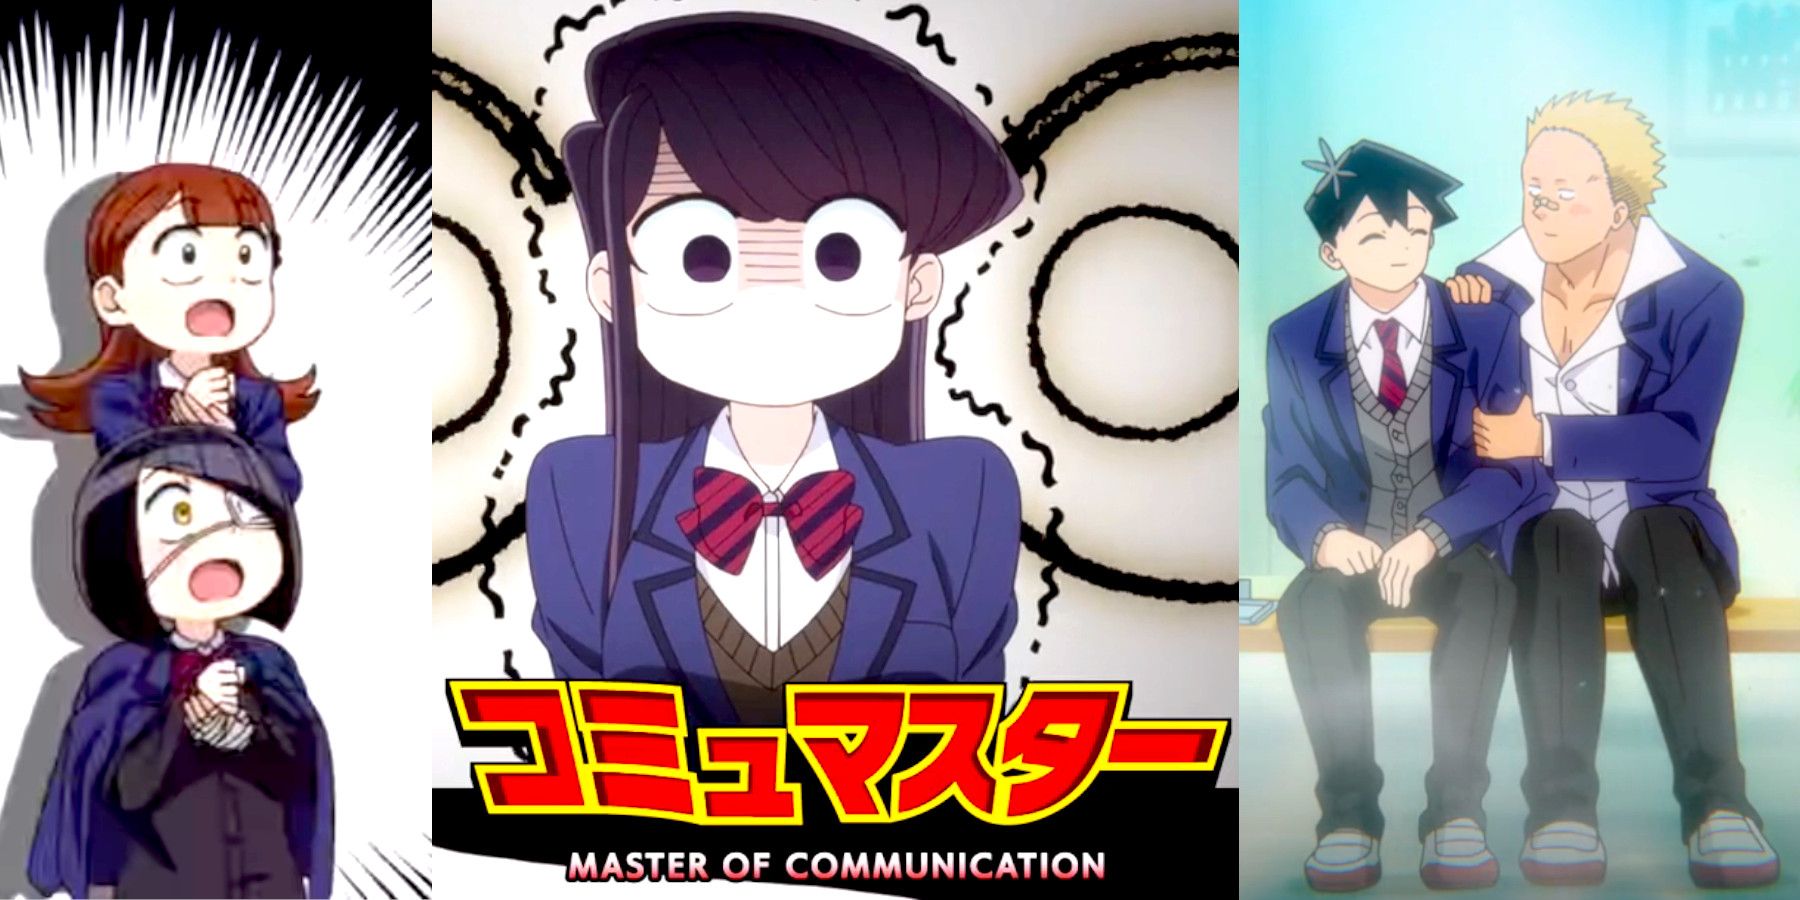 Komi Can't Communicate: Will there be a season 3?